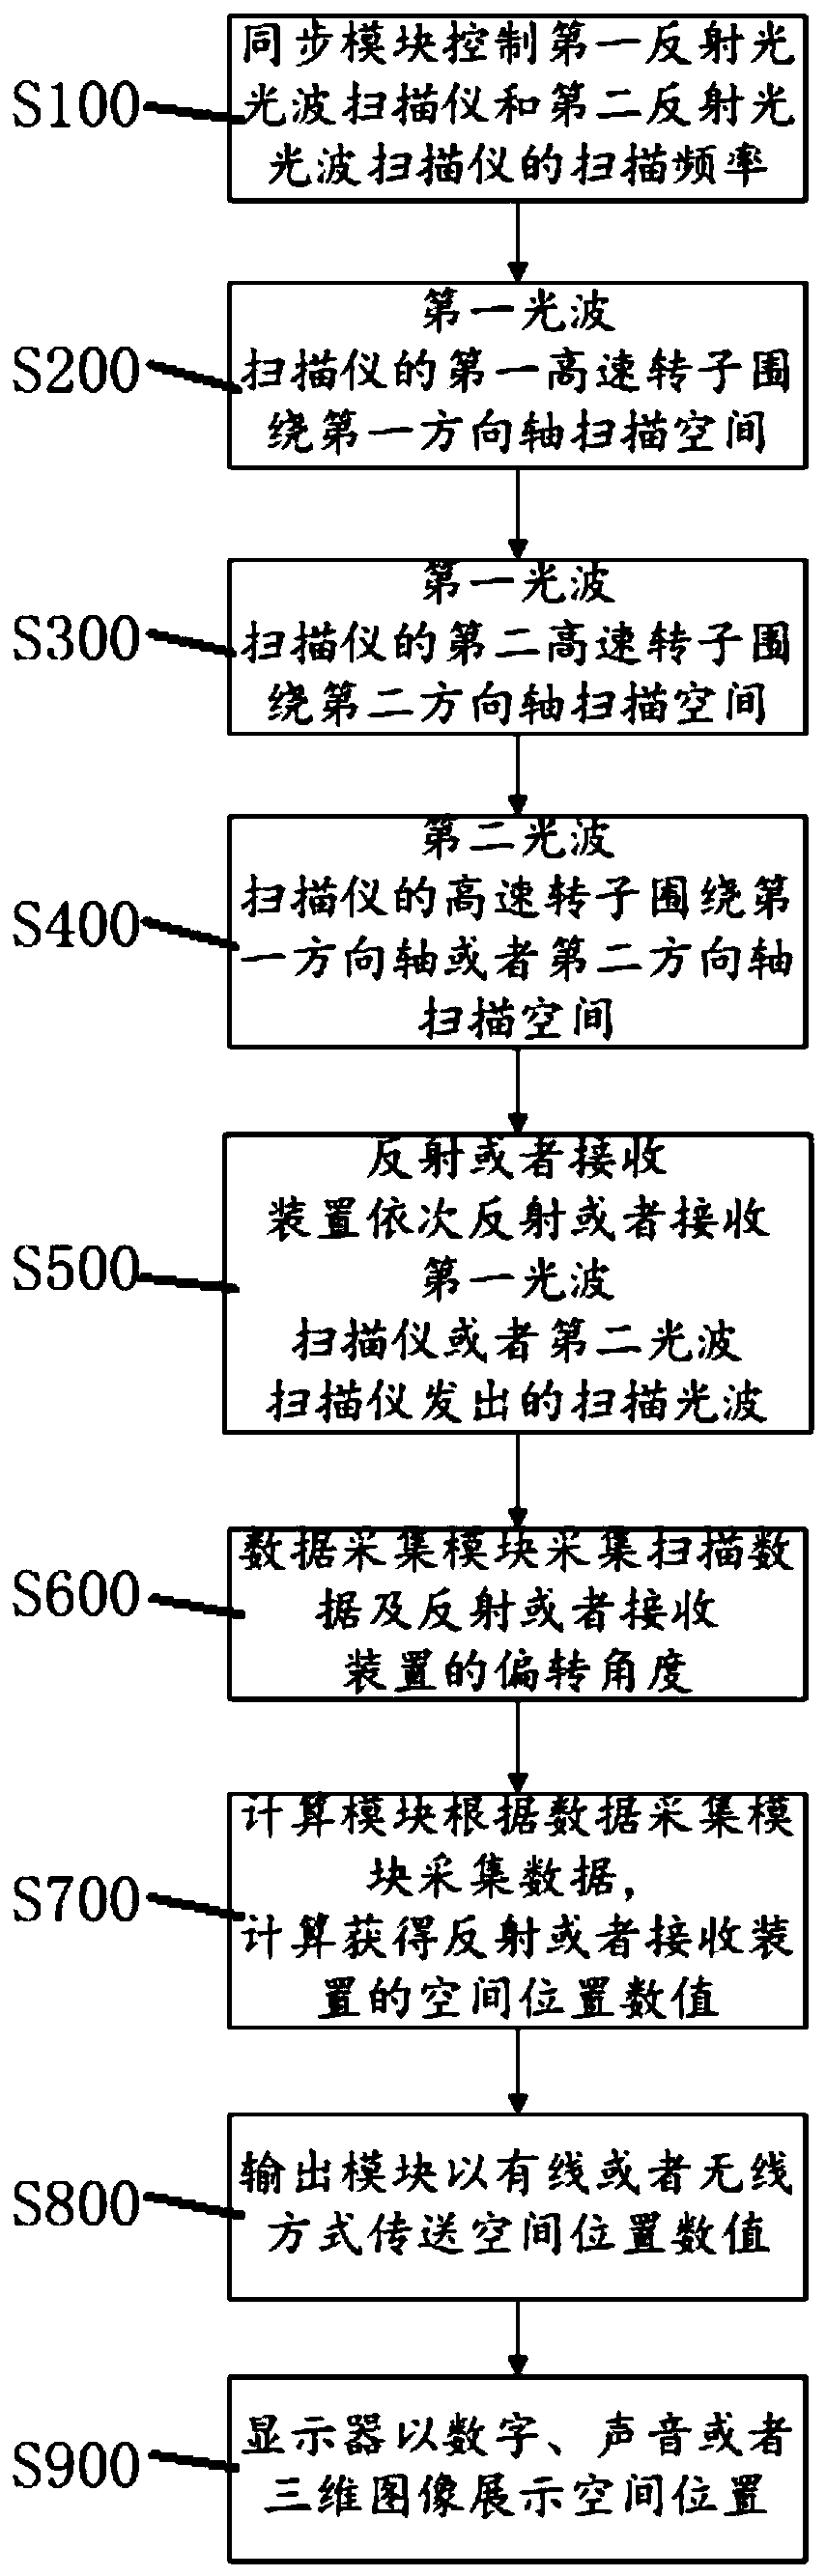 A spatial positioning system and a spatial positioning method